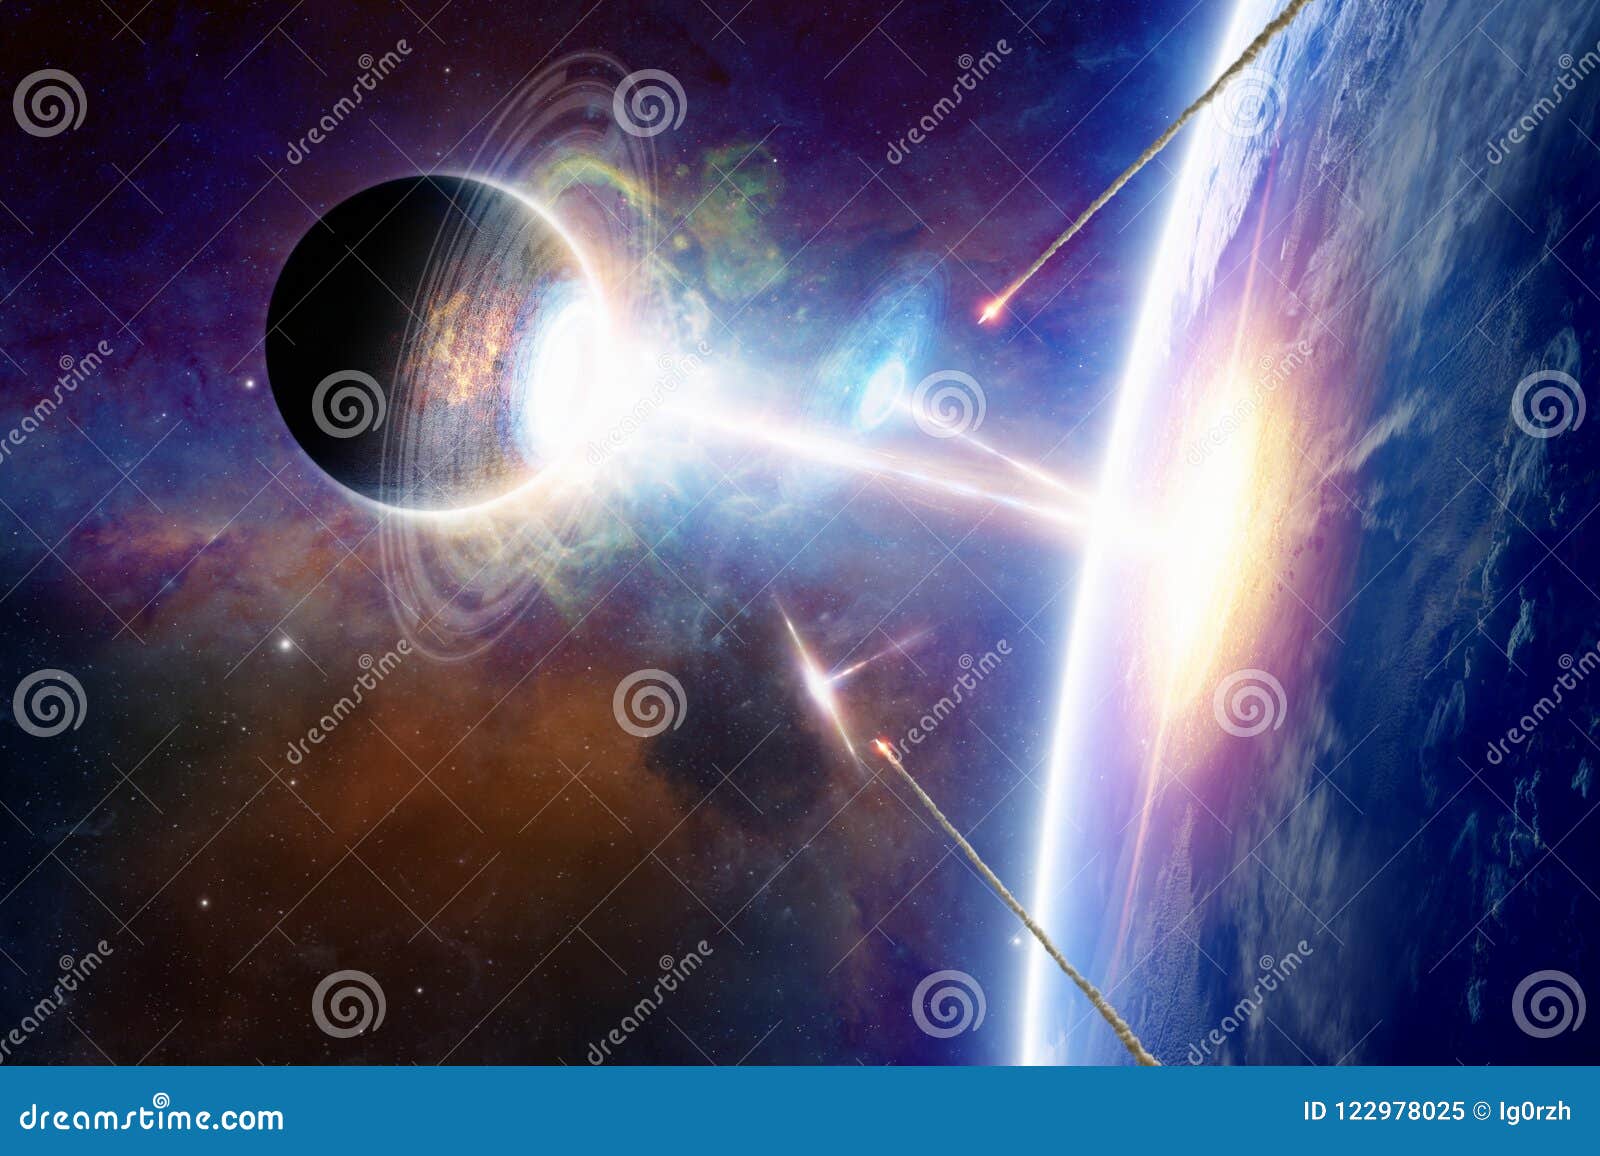 extraterrestrial space ships attack planet earth